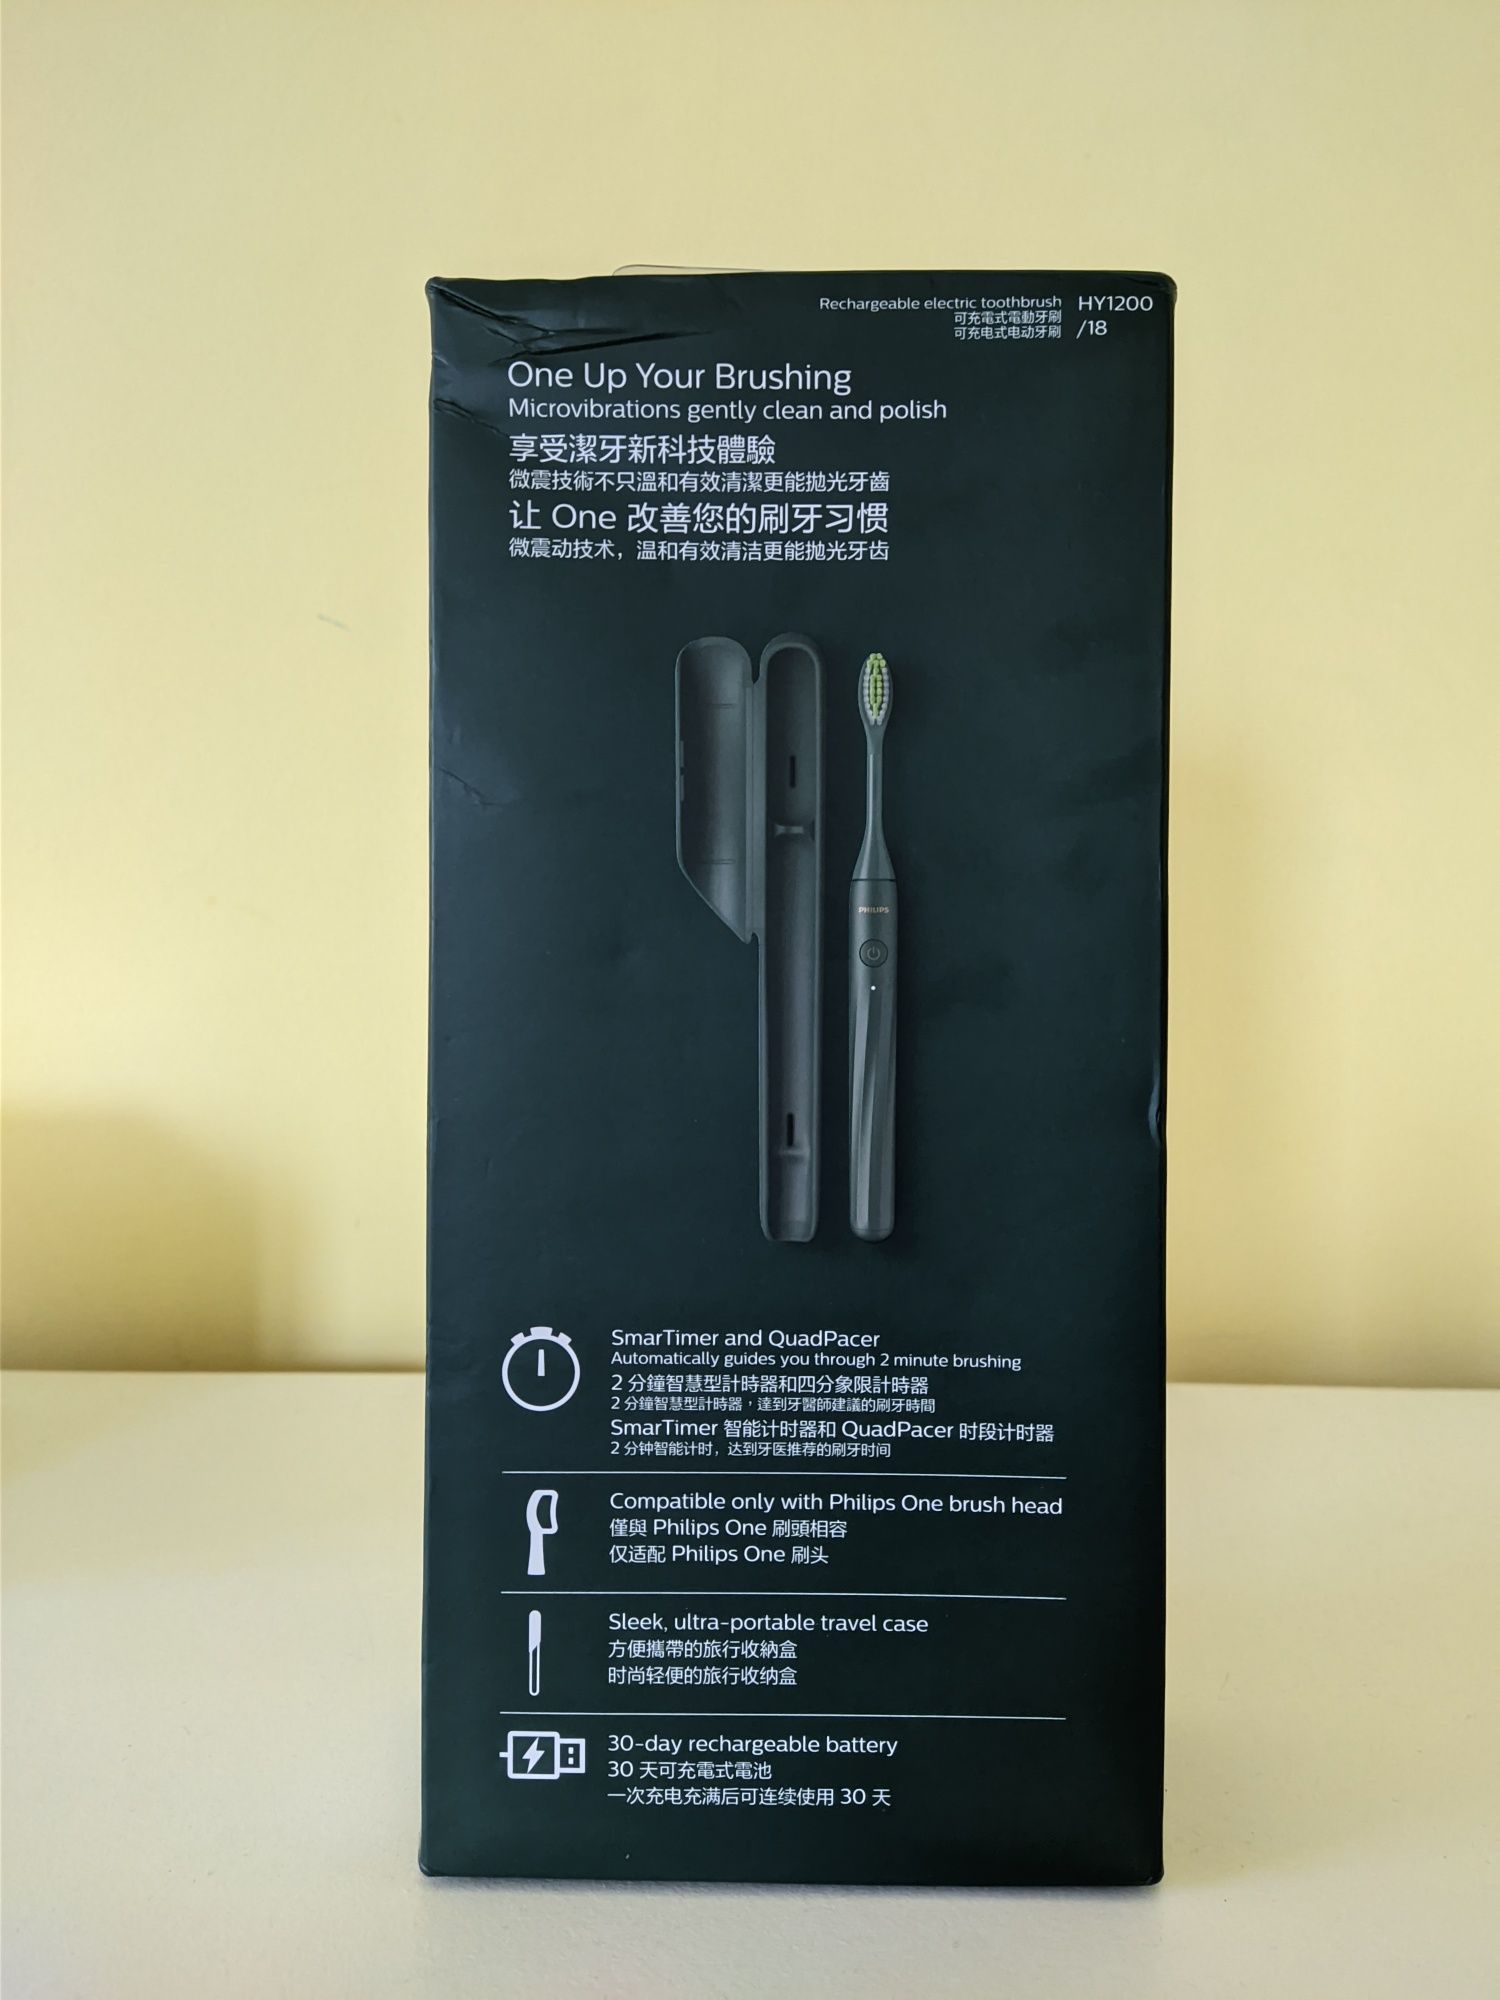 Електрична зубна щітка Philips One by Sonicare Rechargeable HY1200/08